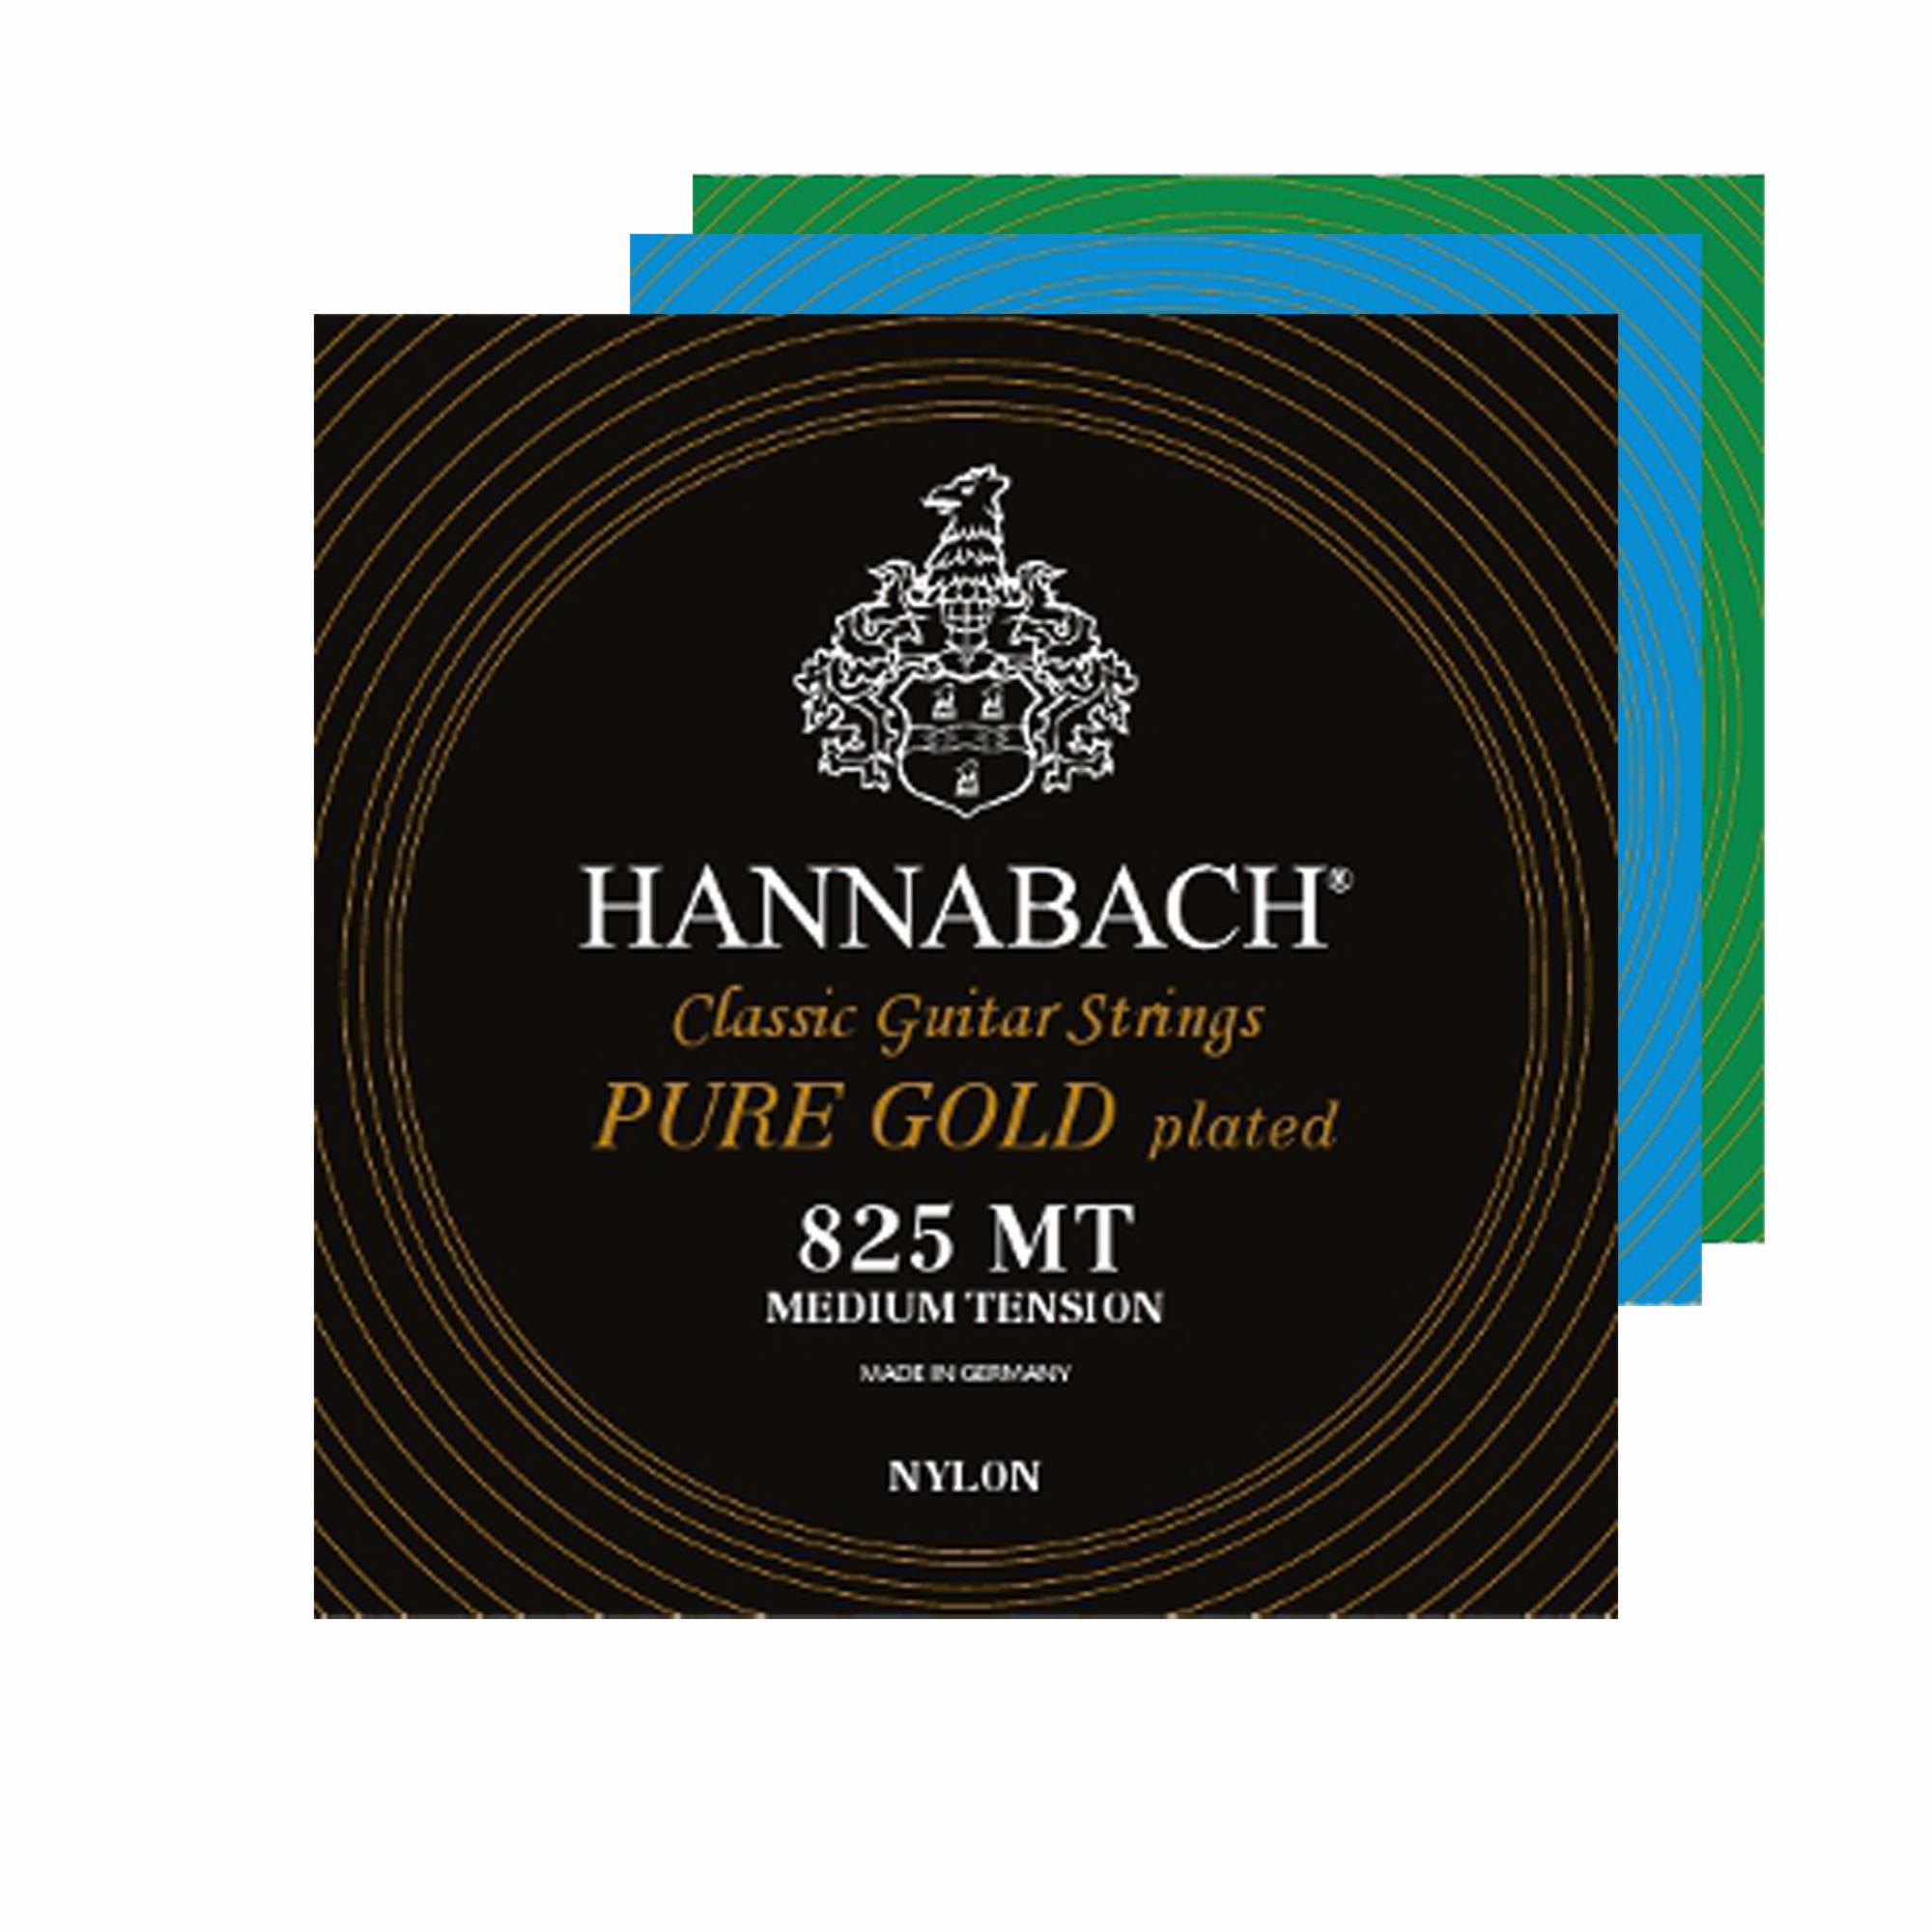 Hannabach 825 Pure Gold Plated Guitar Strings